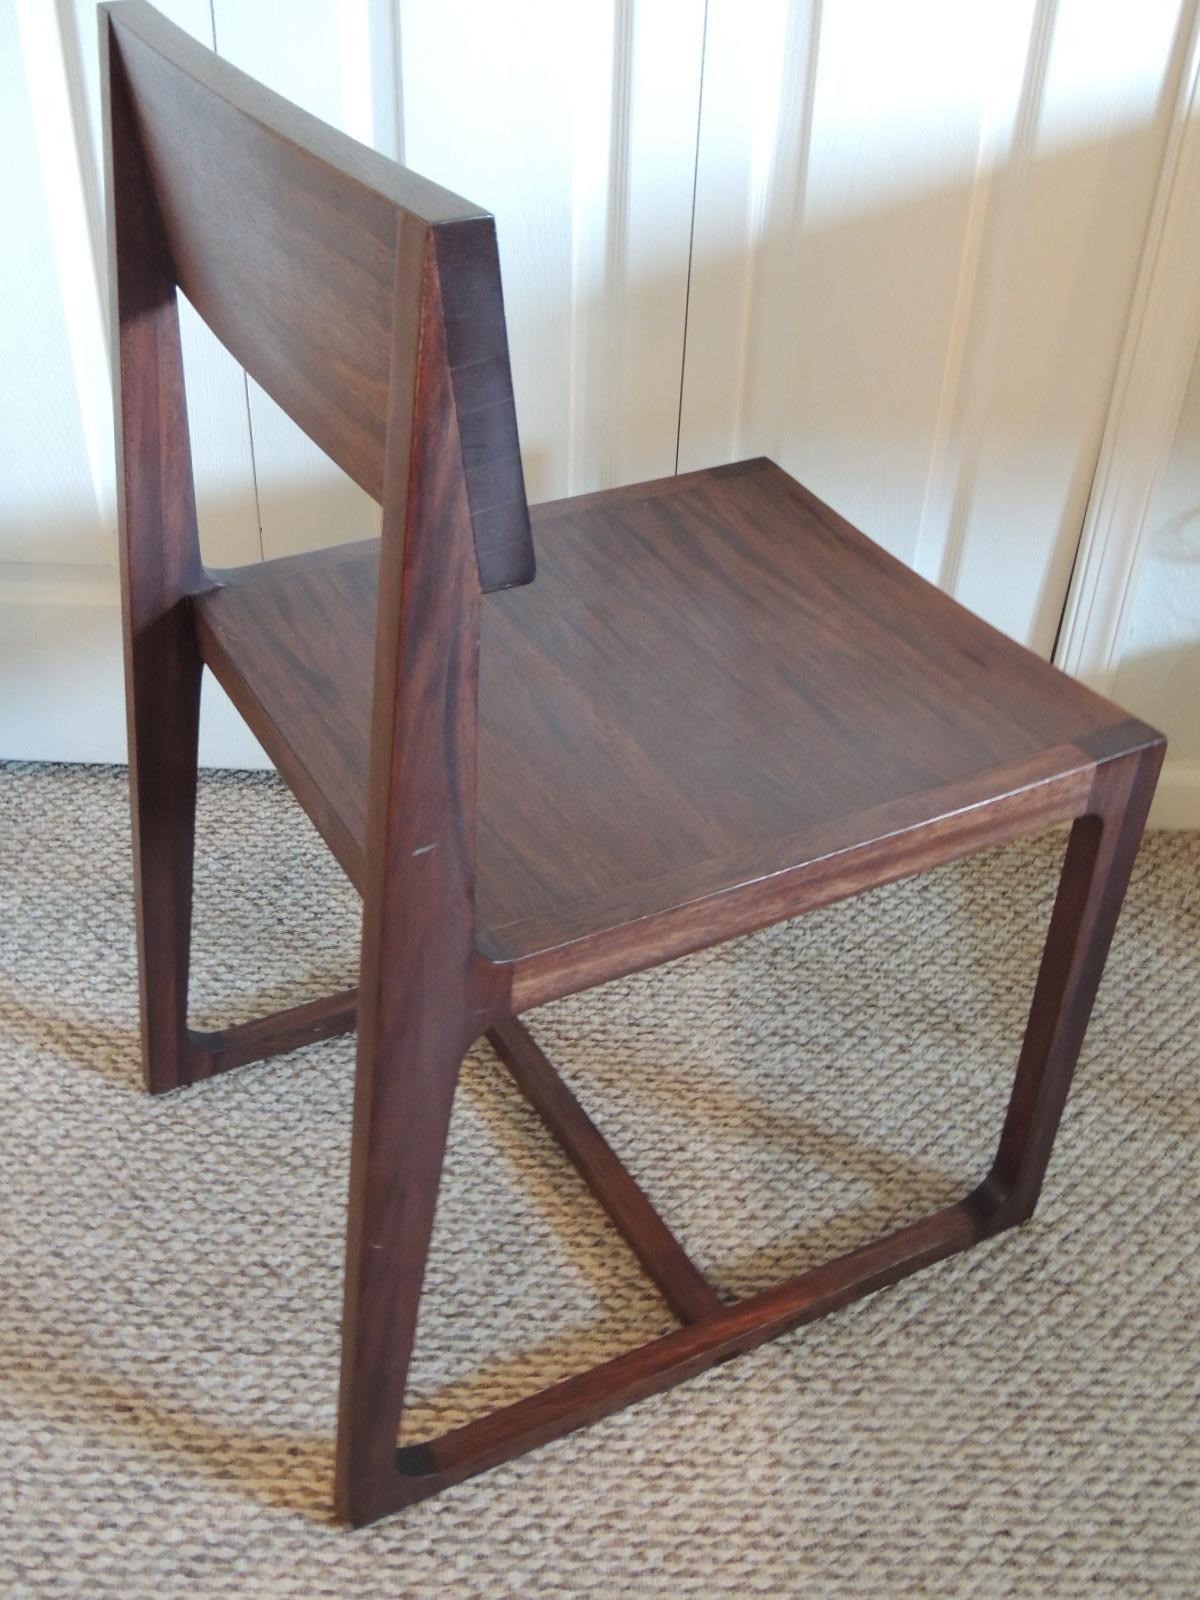 Contemporary Brazilian Hardwood Desk Side Chair Handcrafted in Brazil 1